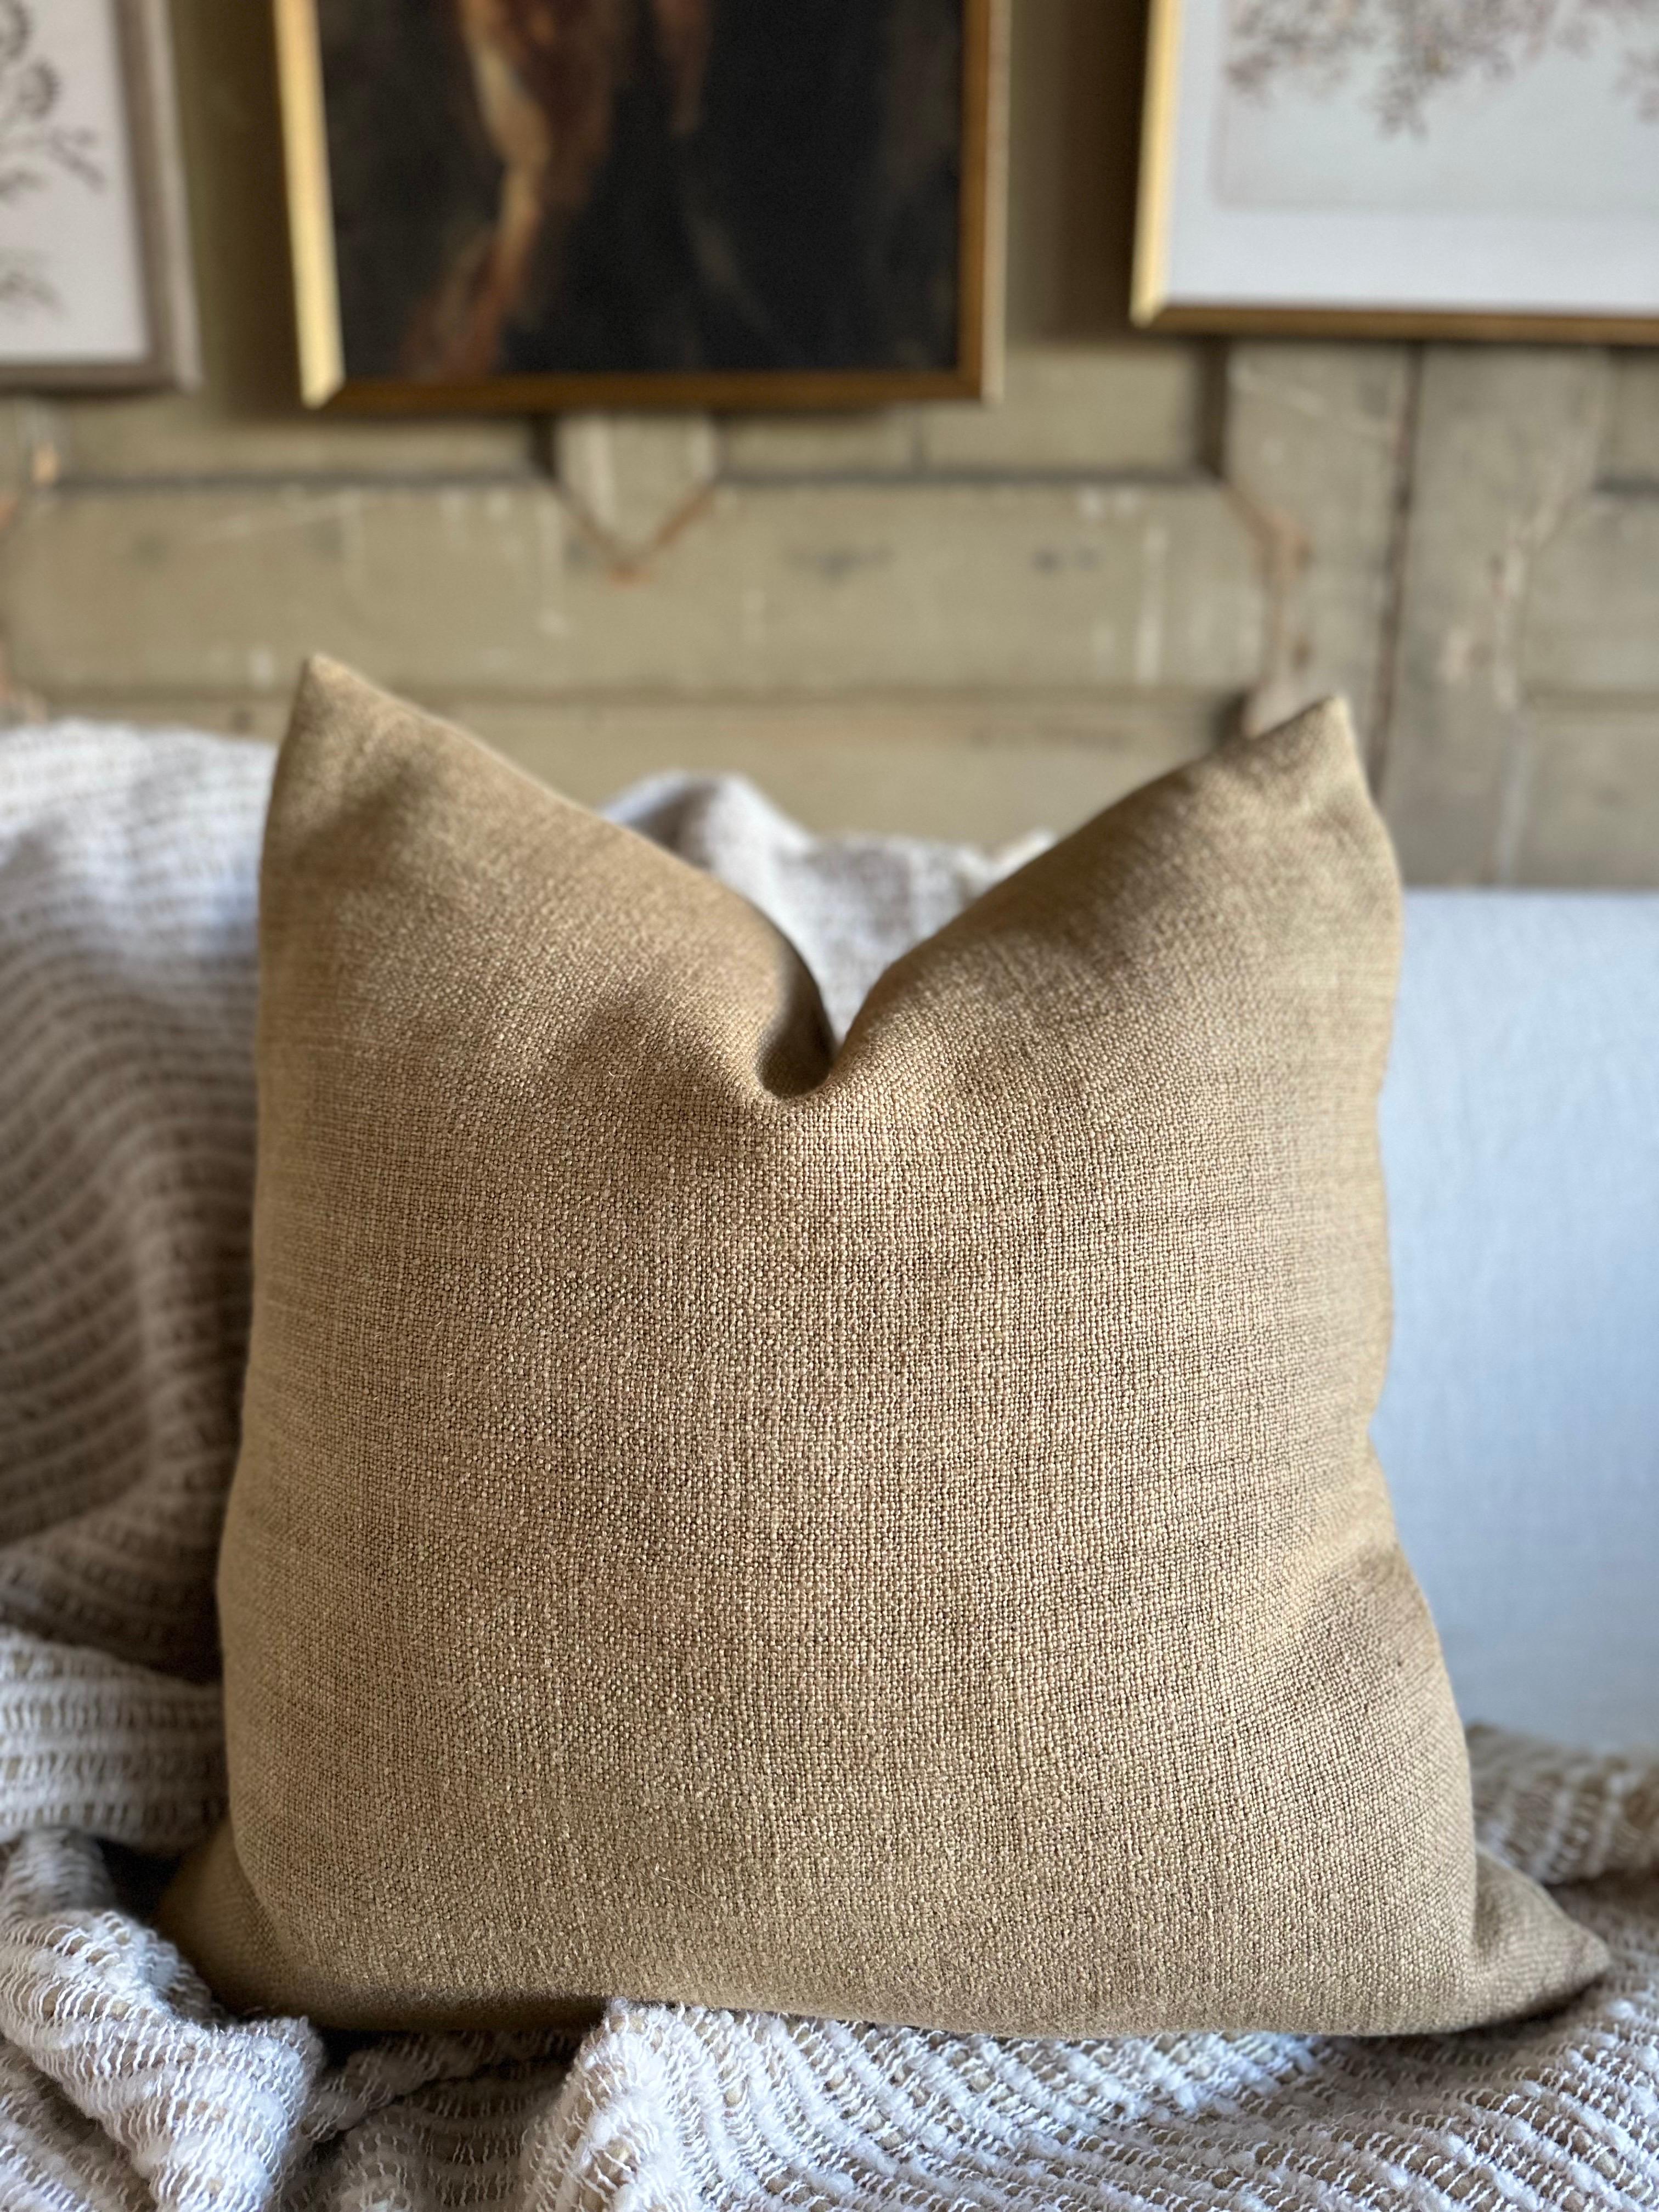 A luxurious heavy woven linen face with stone washed linen back.
Linen fabric is imported from France.
Custom made to order, can be customized to your size.
Color: Havane
Antique brass zipper
Size 22x22
Includes Down Feather Insert
Care: Can be